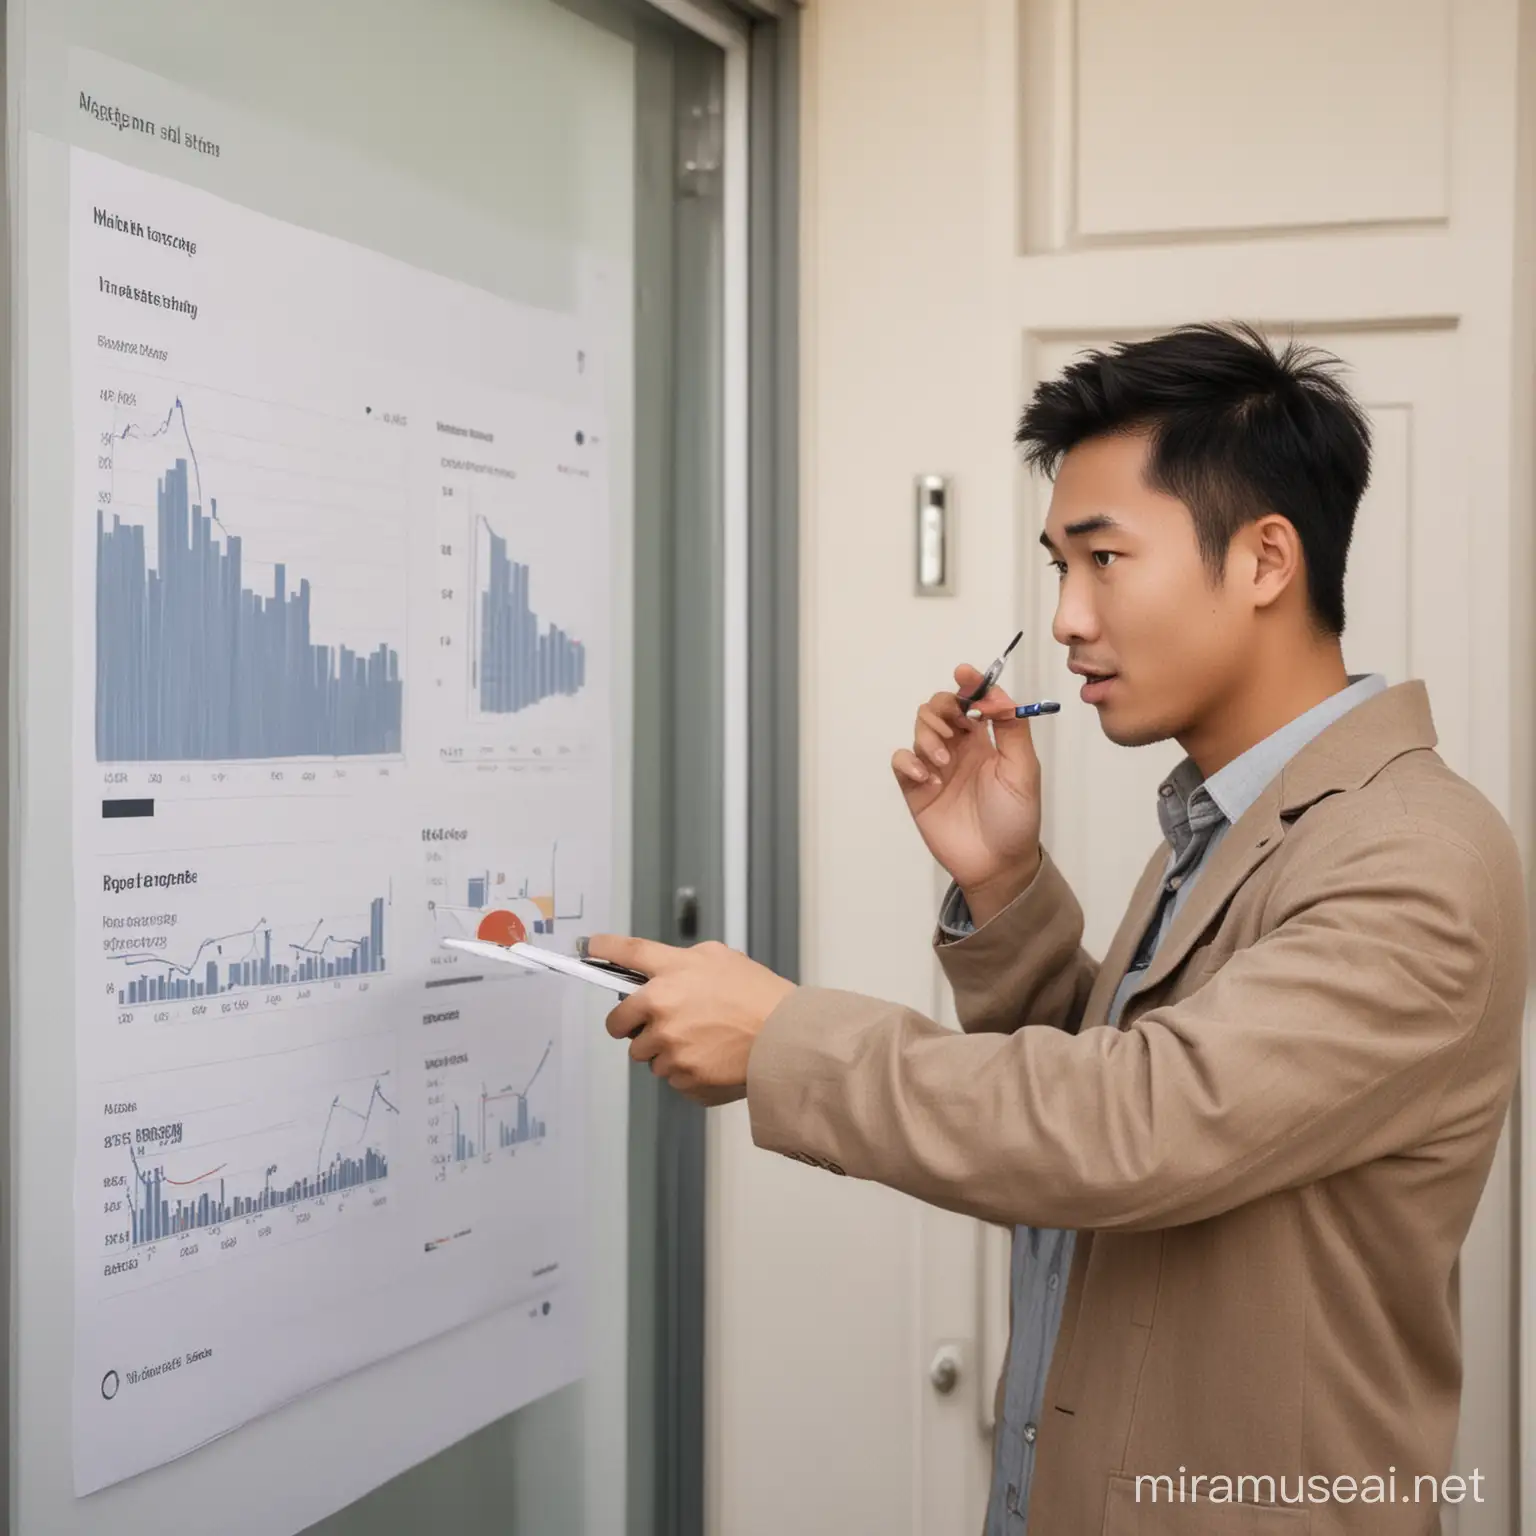 give me a picture divided by half, one side showing a asian guy property agenting knocking on doors, the other side showing an asian man having his laptop and seeing some graphs and analytic.